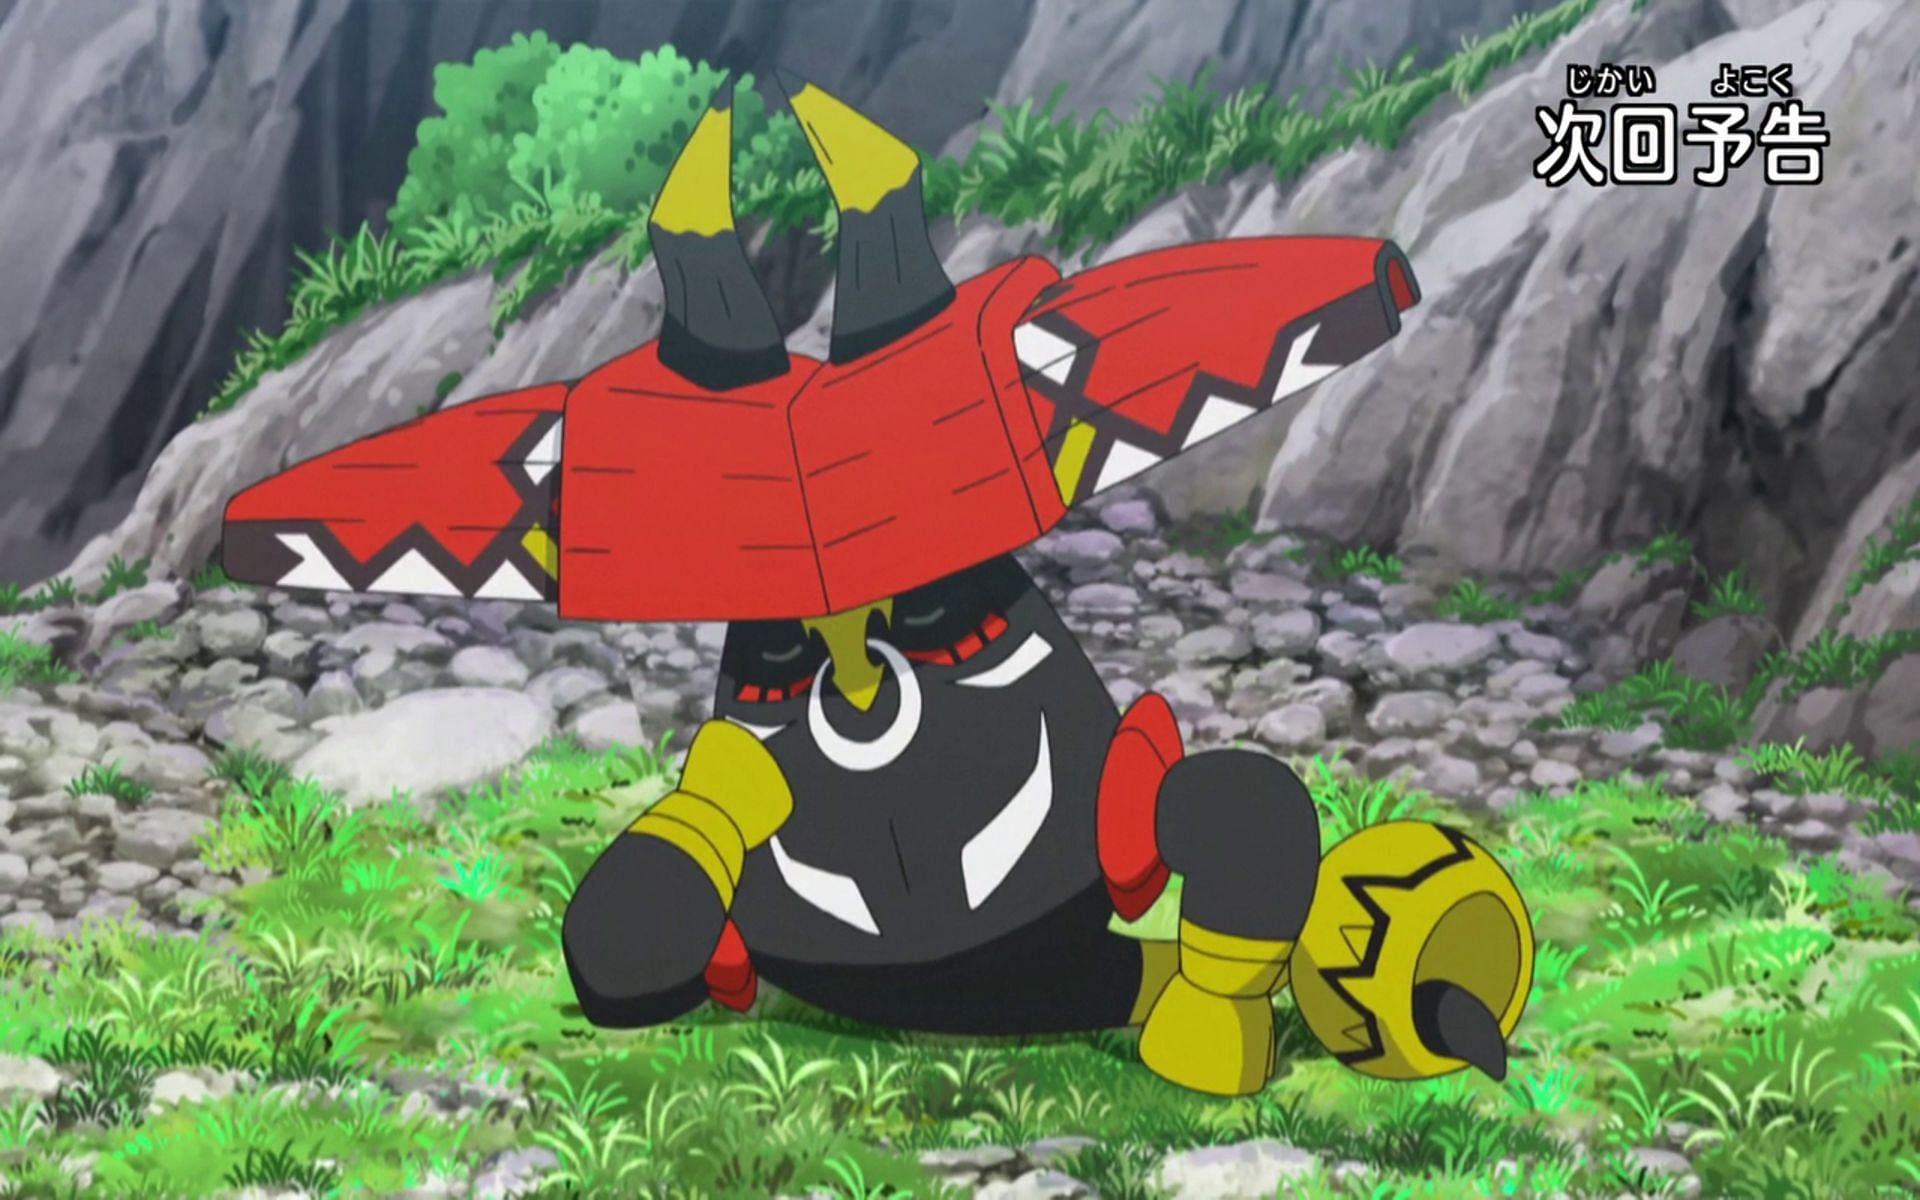 Tapu Bulu makes its debut at Spring into Spring (Image via The Pokemon Company)